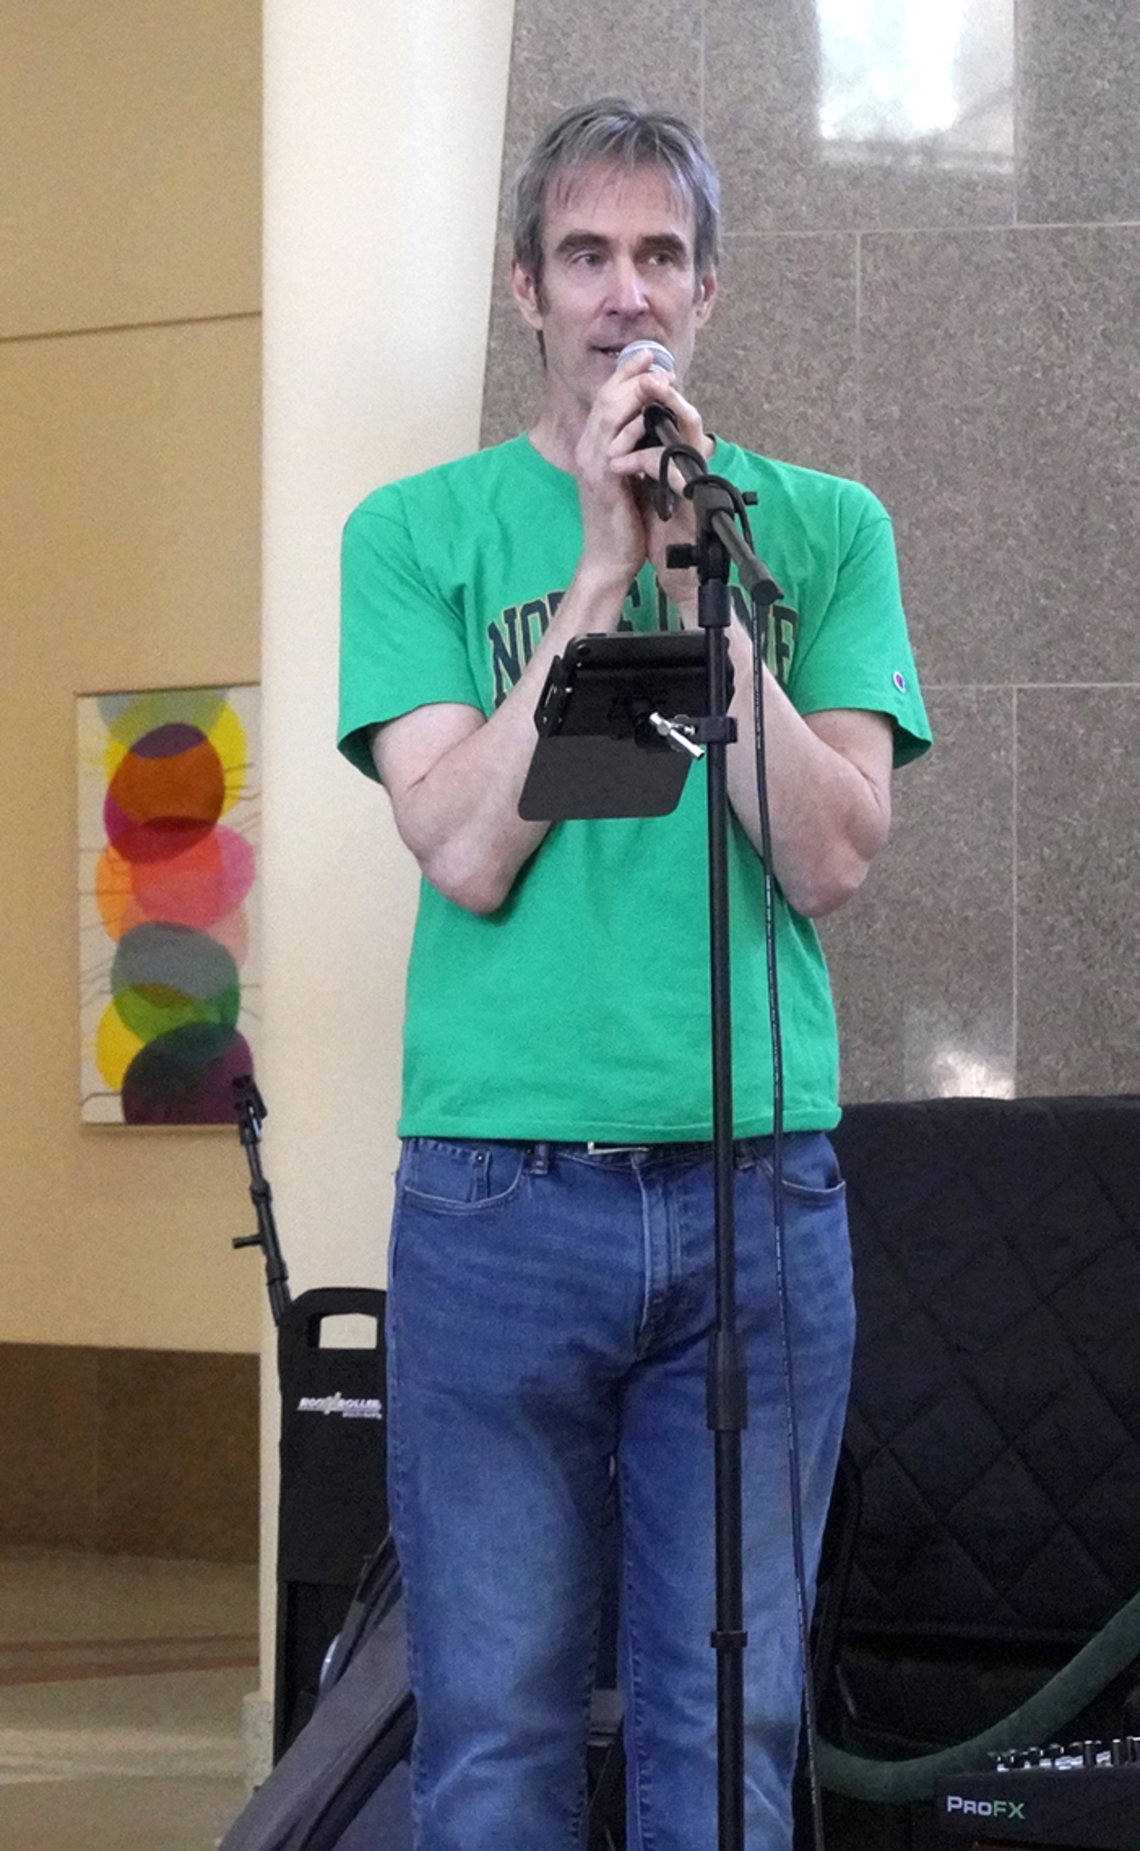 A man in a green t-shirt sings into a microphone.